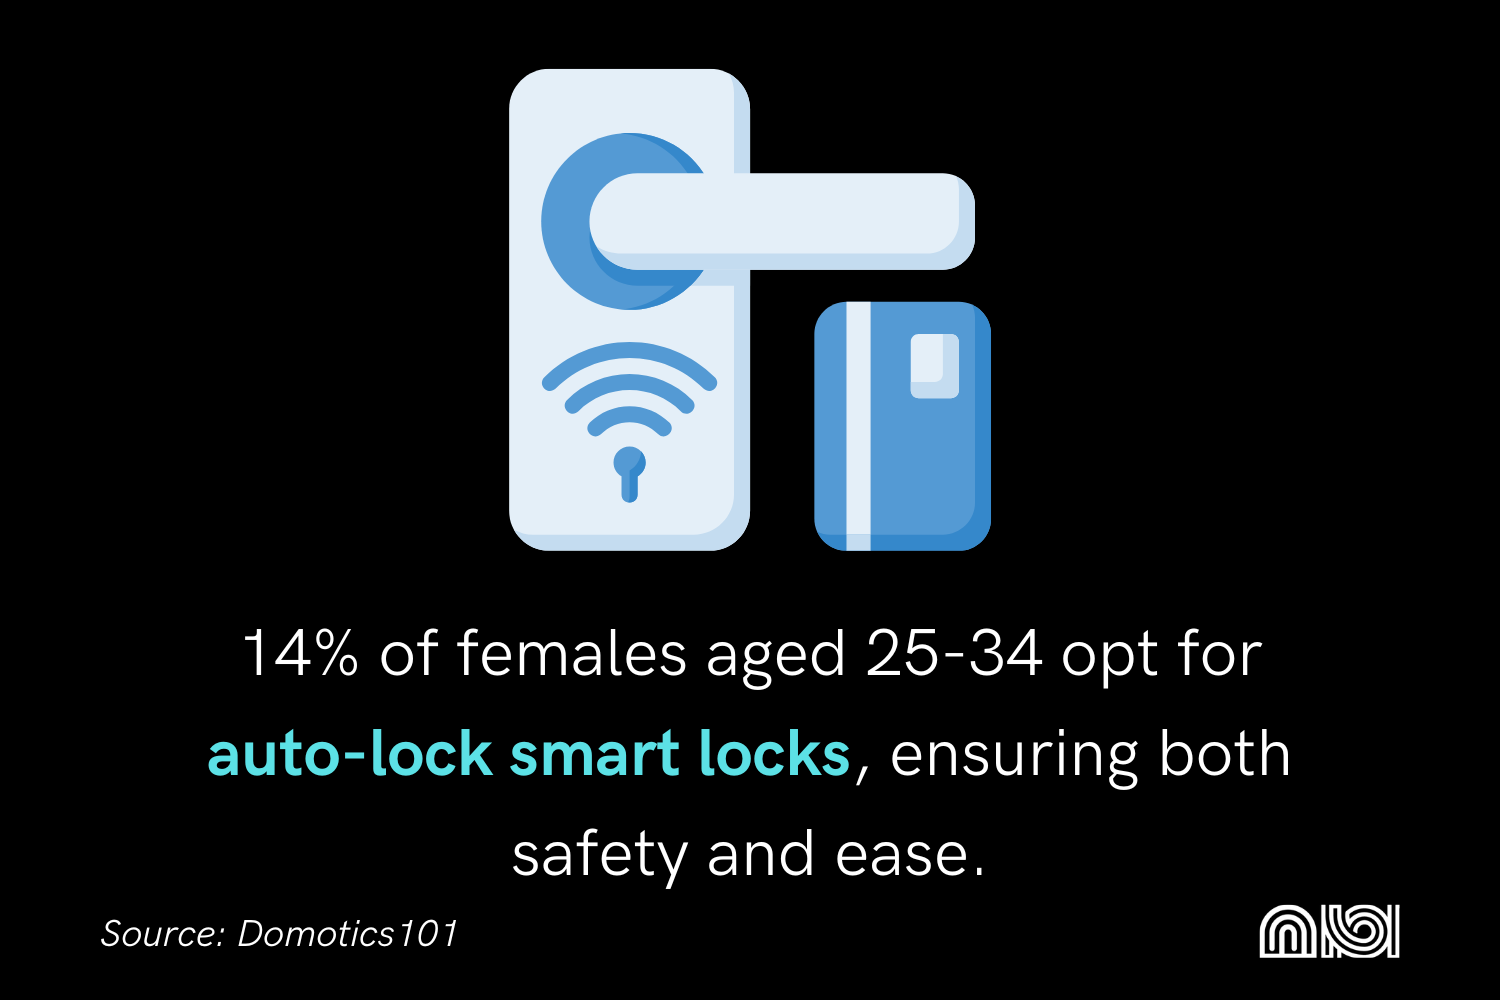 Image showing 14% of females aged 25-34 preferring auto-lock smart locks for enhanced security.